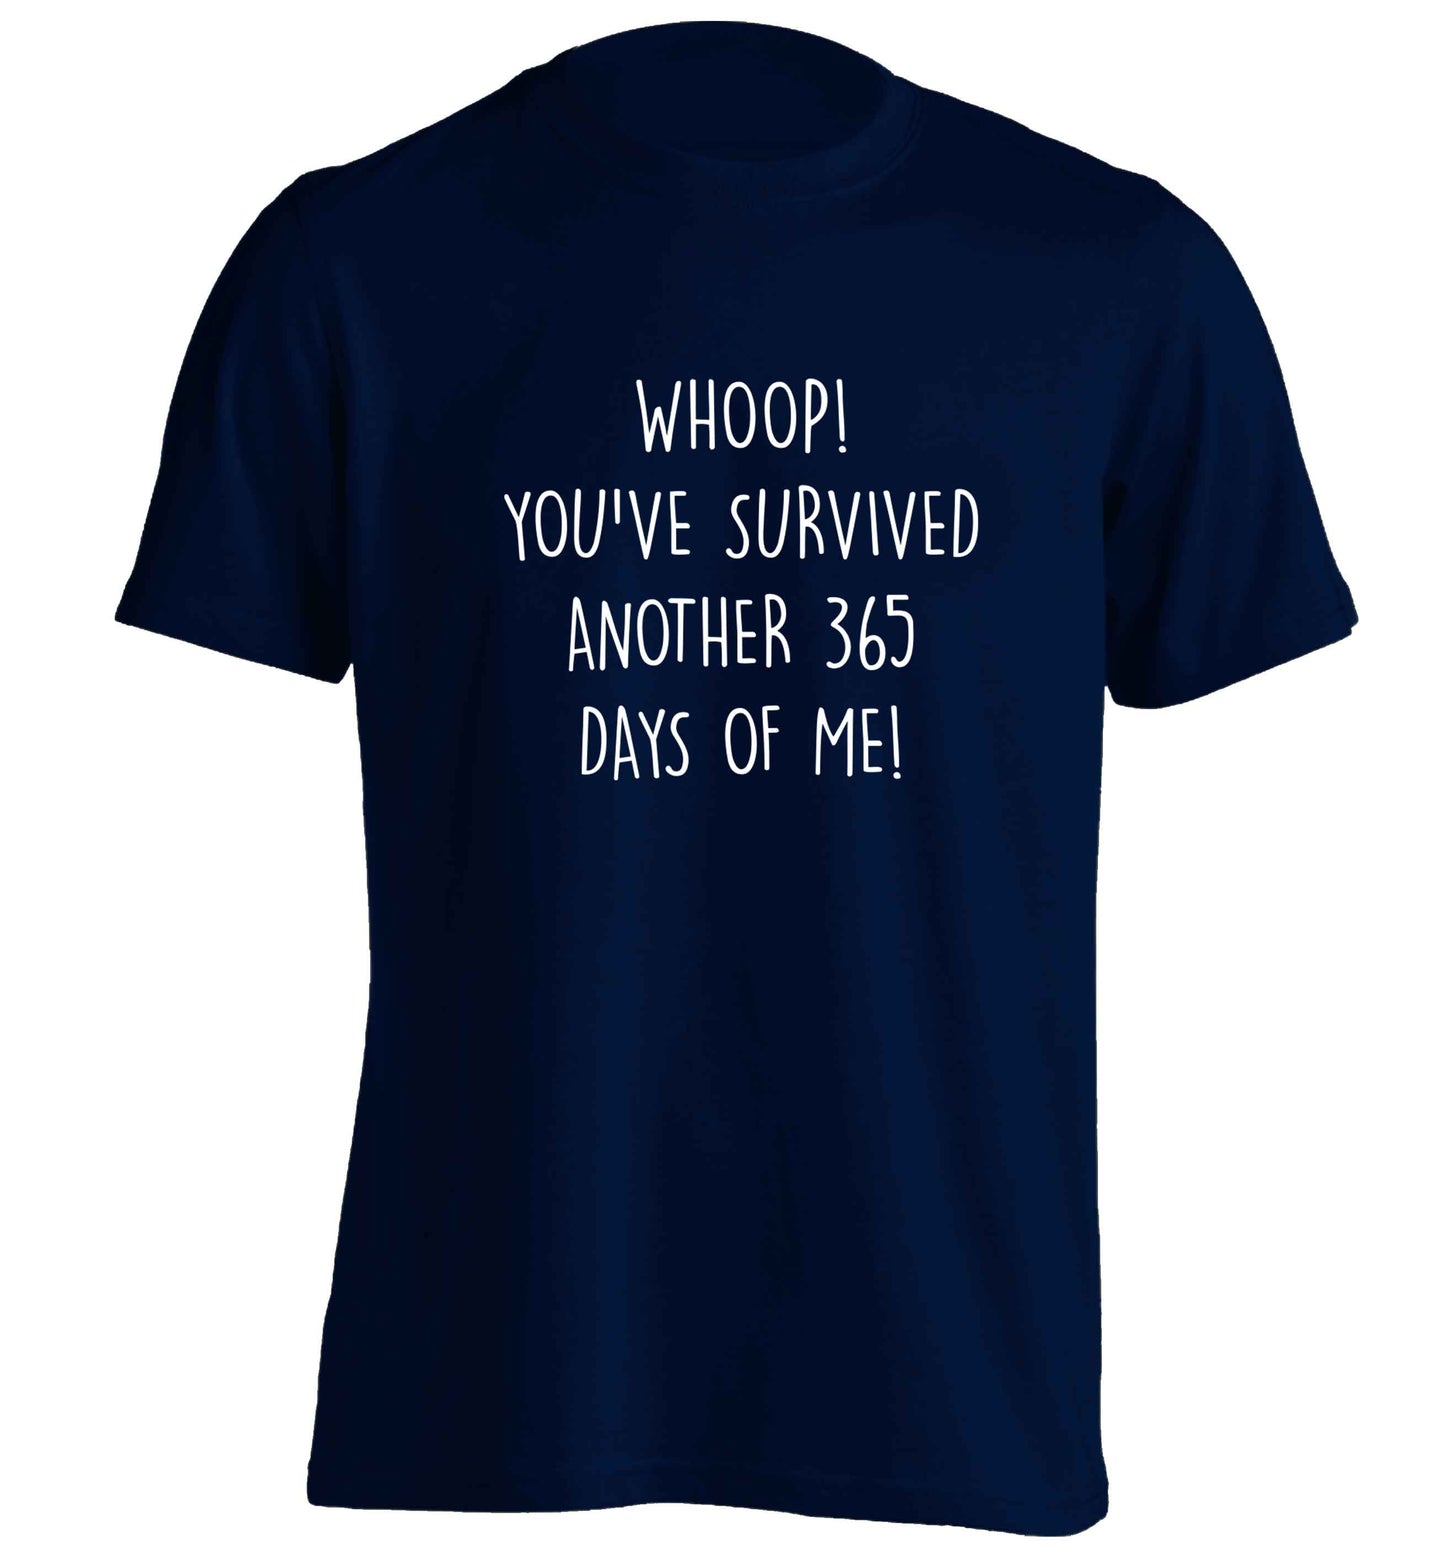 Whoop! You've survived another 365 days with me! adults unisex navy Tshirt 2XL